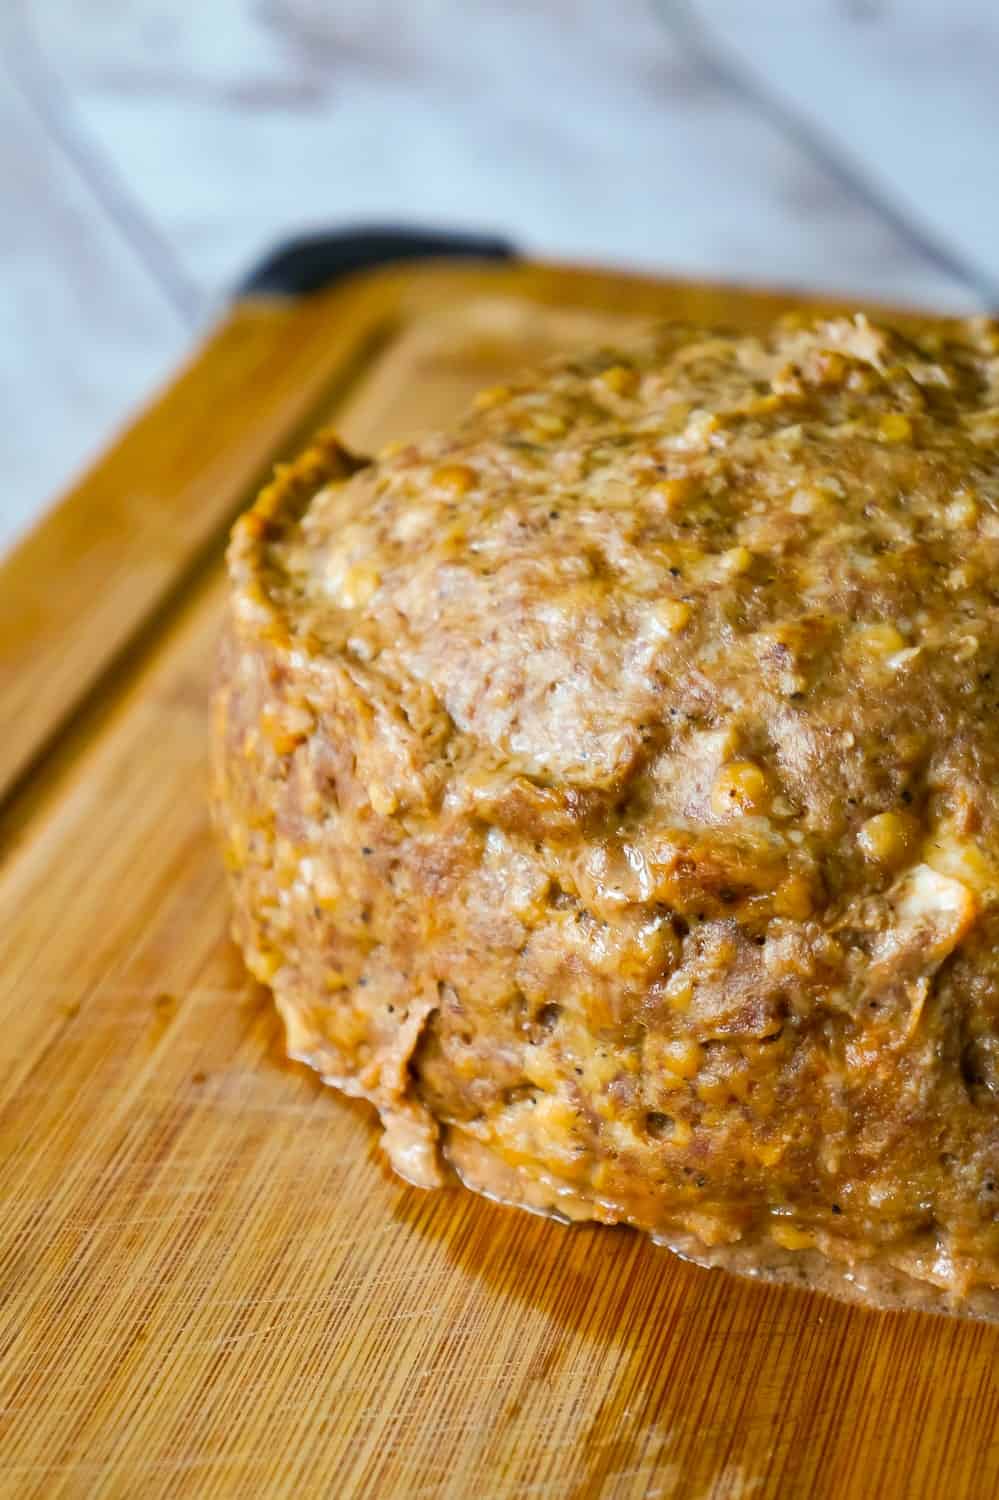 Instant Pot Cream Cheese Stuffed Meatloaf and Mashed Potatoes is an easy dinner recipe all cooked together in the Instant Pot. This delicious meatloaf is stuffed with Philadelphia Chive Whipped Cream Cheese and Sweet Baby Ray's BBQ Sauce.